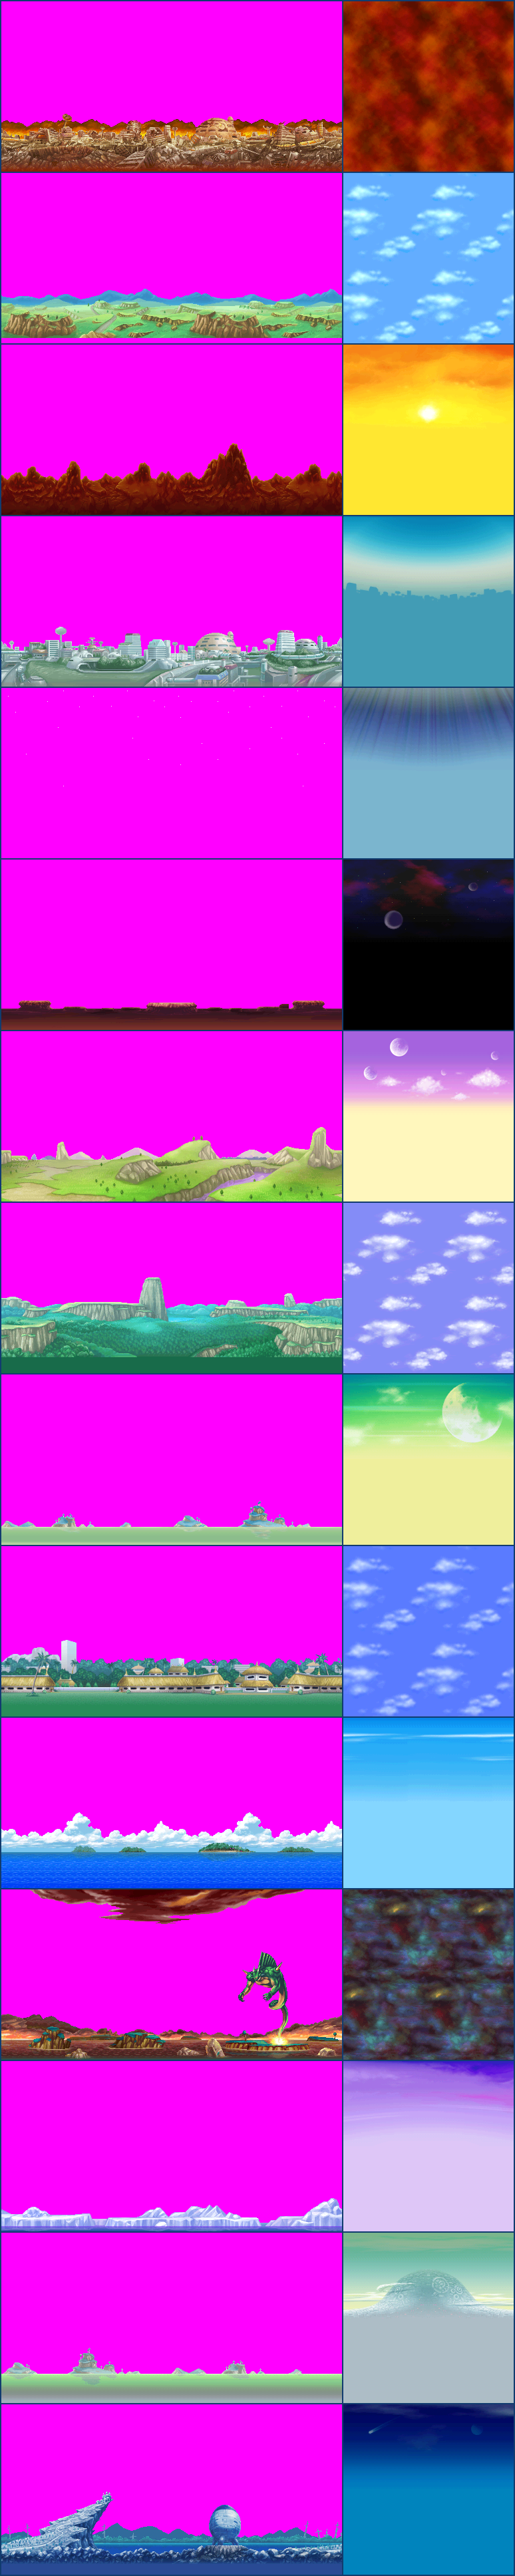 DS / DSi - Dragon Ball Z: Supersonic Warriors 2 - Stage Backgrounds